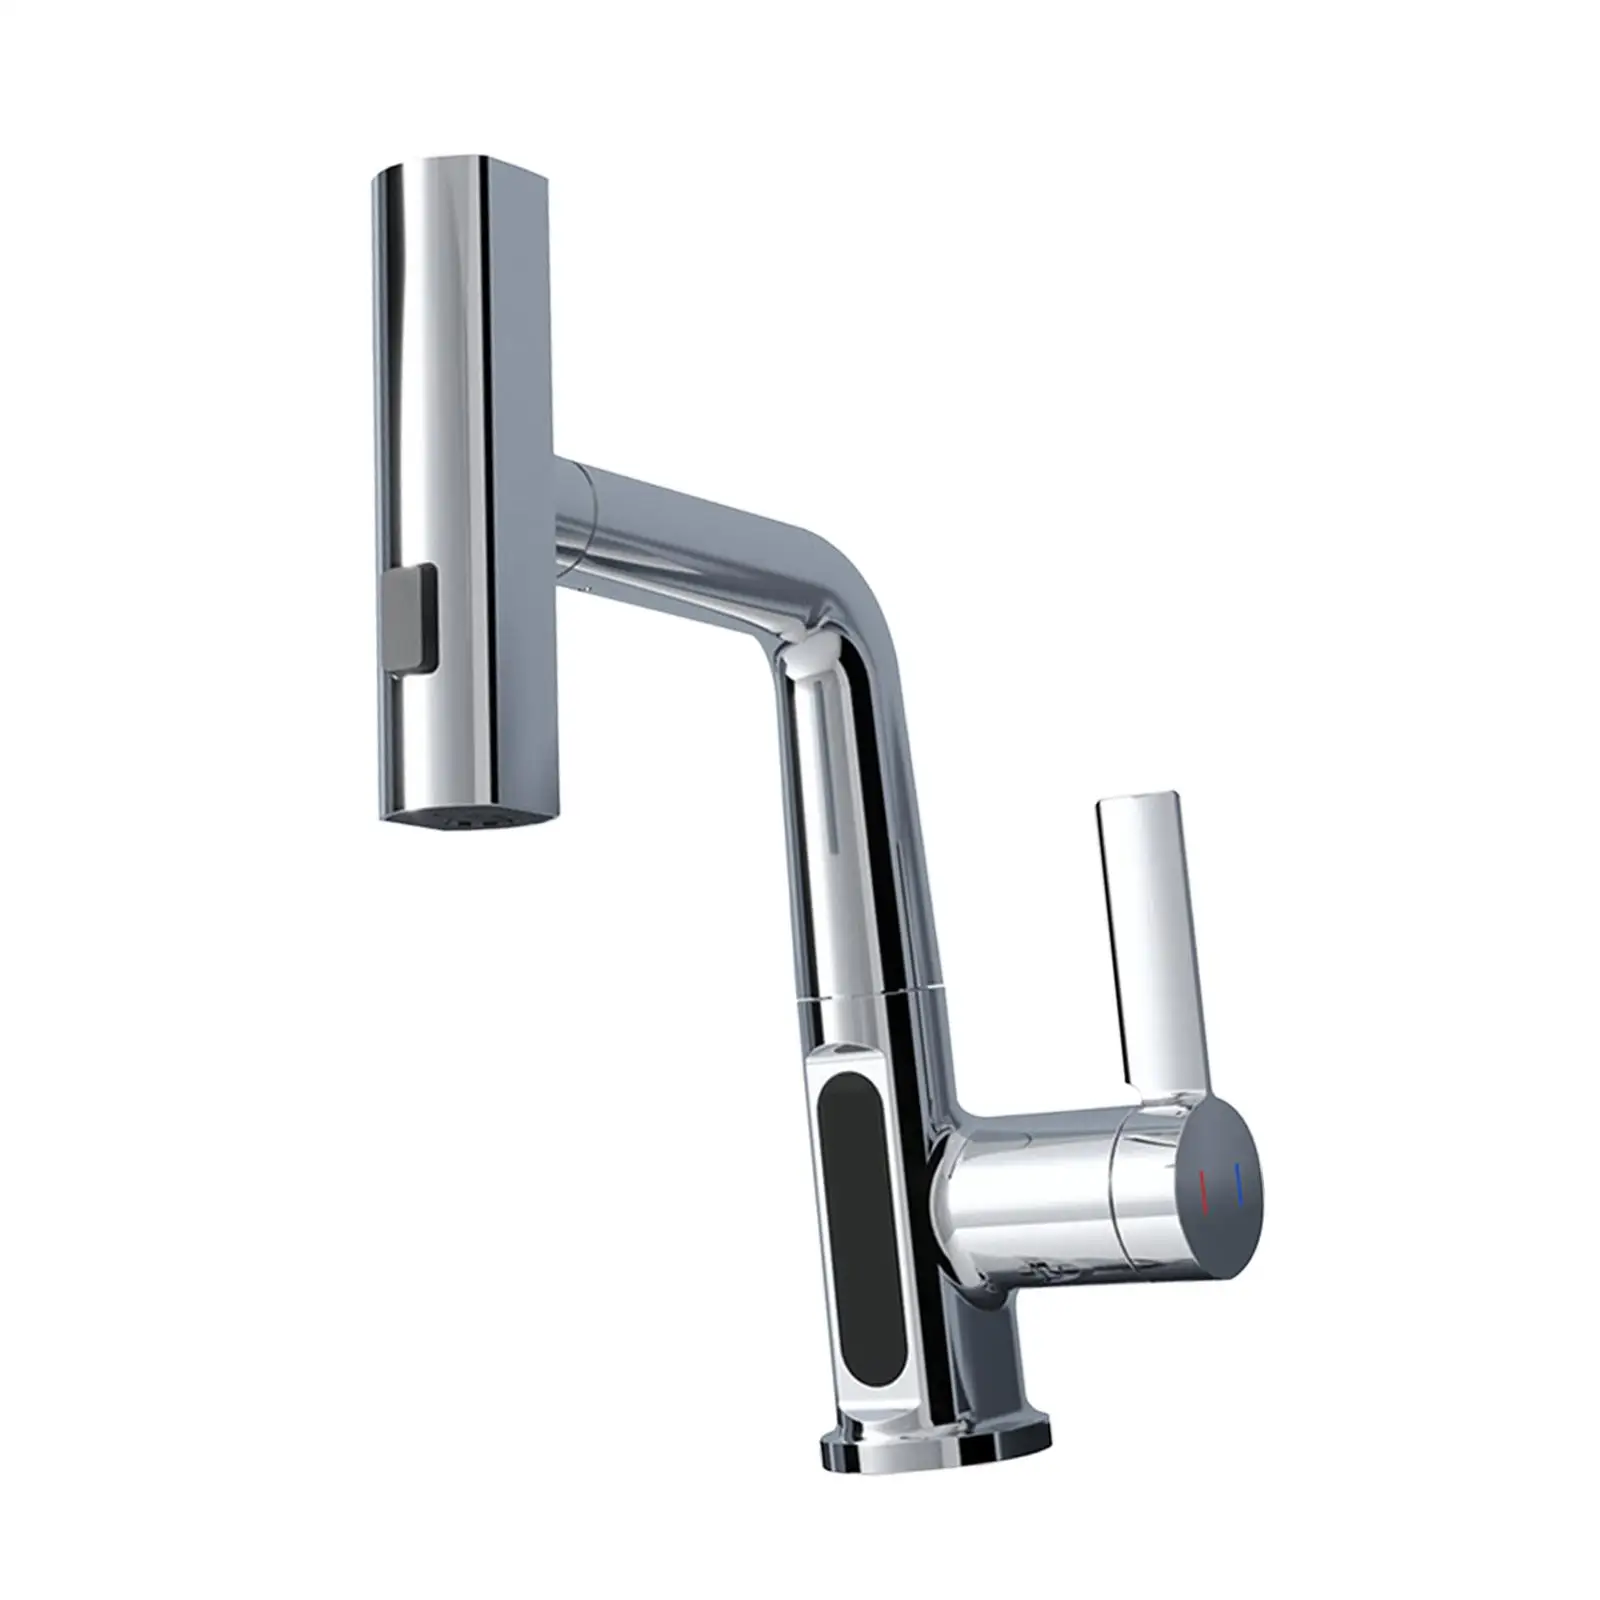 Hot and Cold Water Vanity Basin Faucet Kitchen Faucet with Pull Down Sprayer